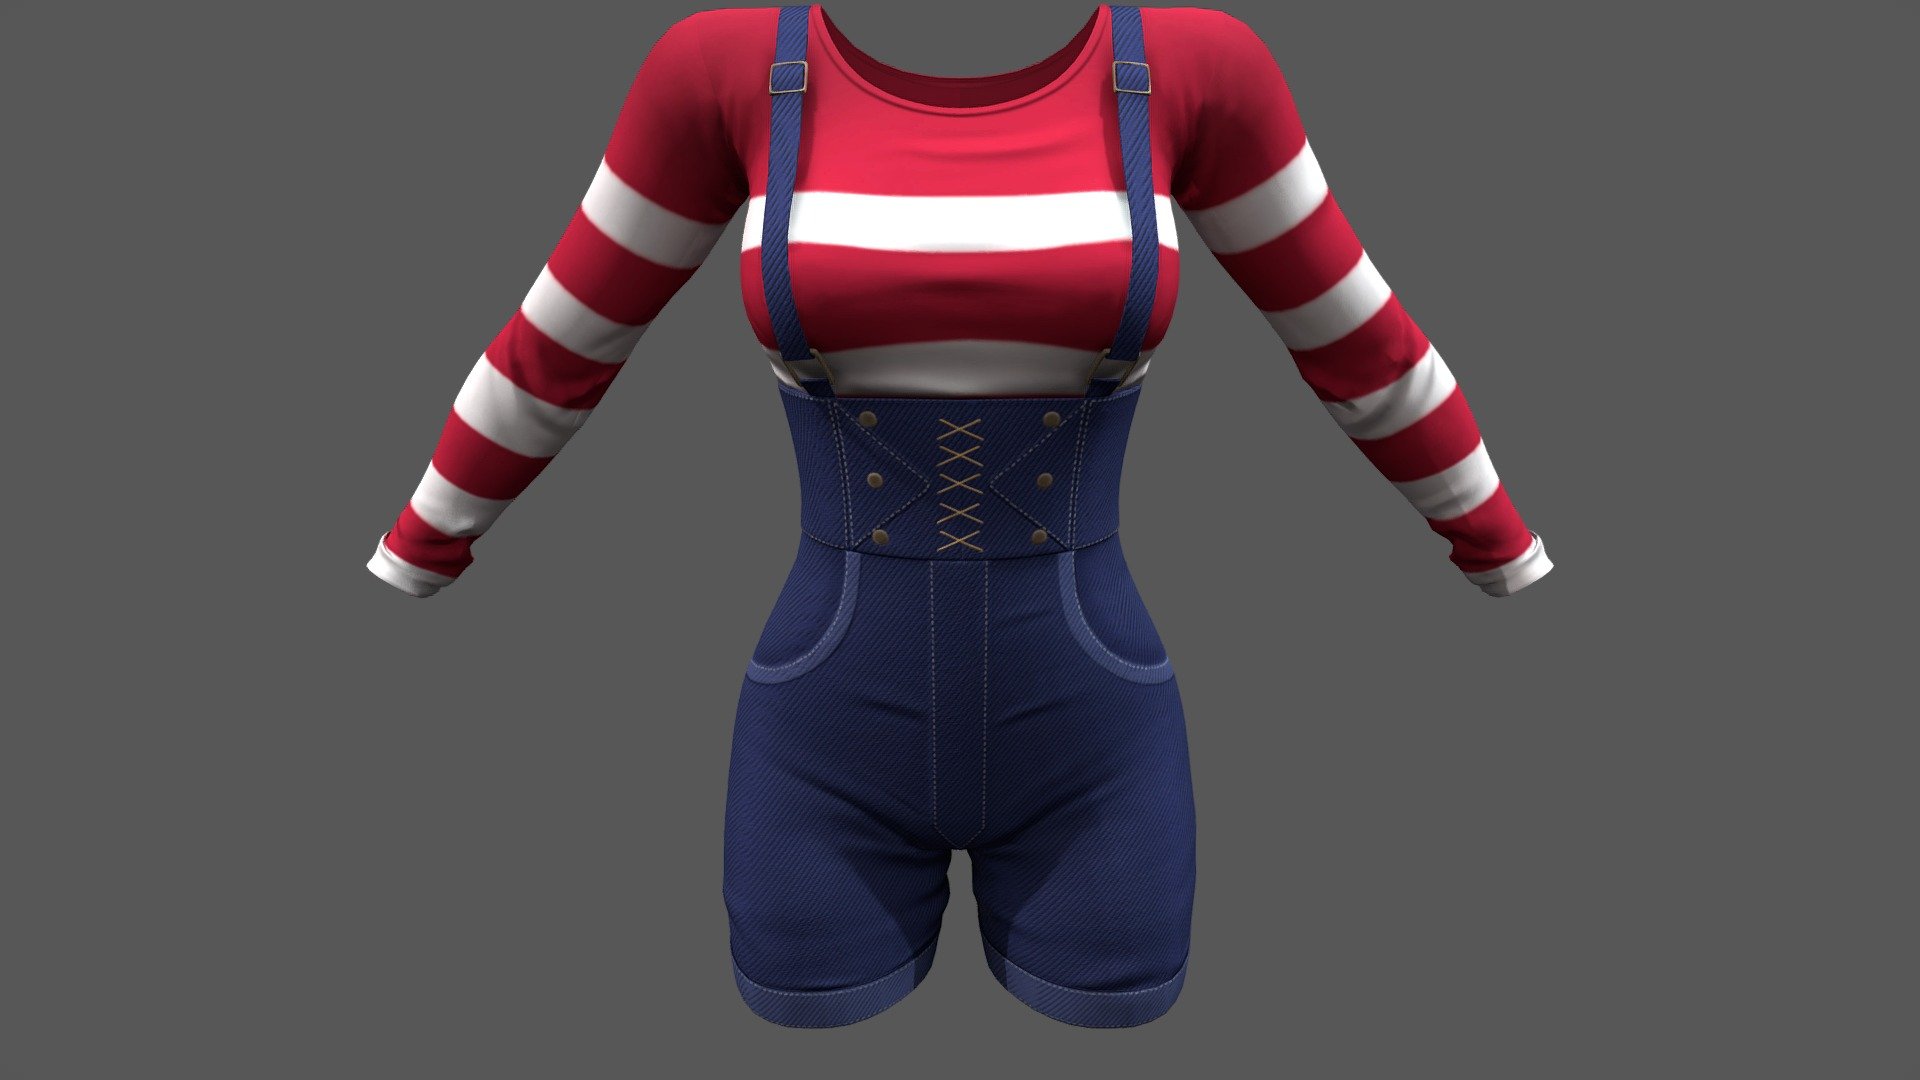 Female Denim Shorts Overalls Sweater Outfit

Can be fitted to any character

Clean topology

No overlapping smart optimized unwrapped UVs

High-quality realistic textures

FBX, OBJ, gITF, USDZ (request other formats)

PBR or Classic

Type     user:3dia &ldquo;search term